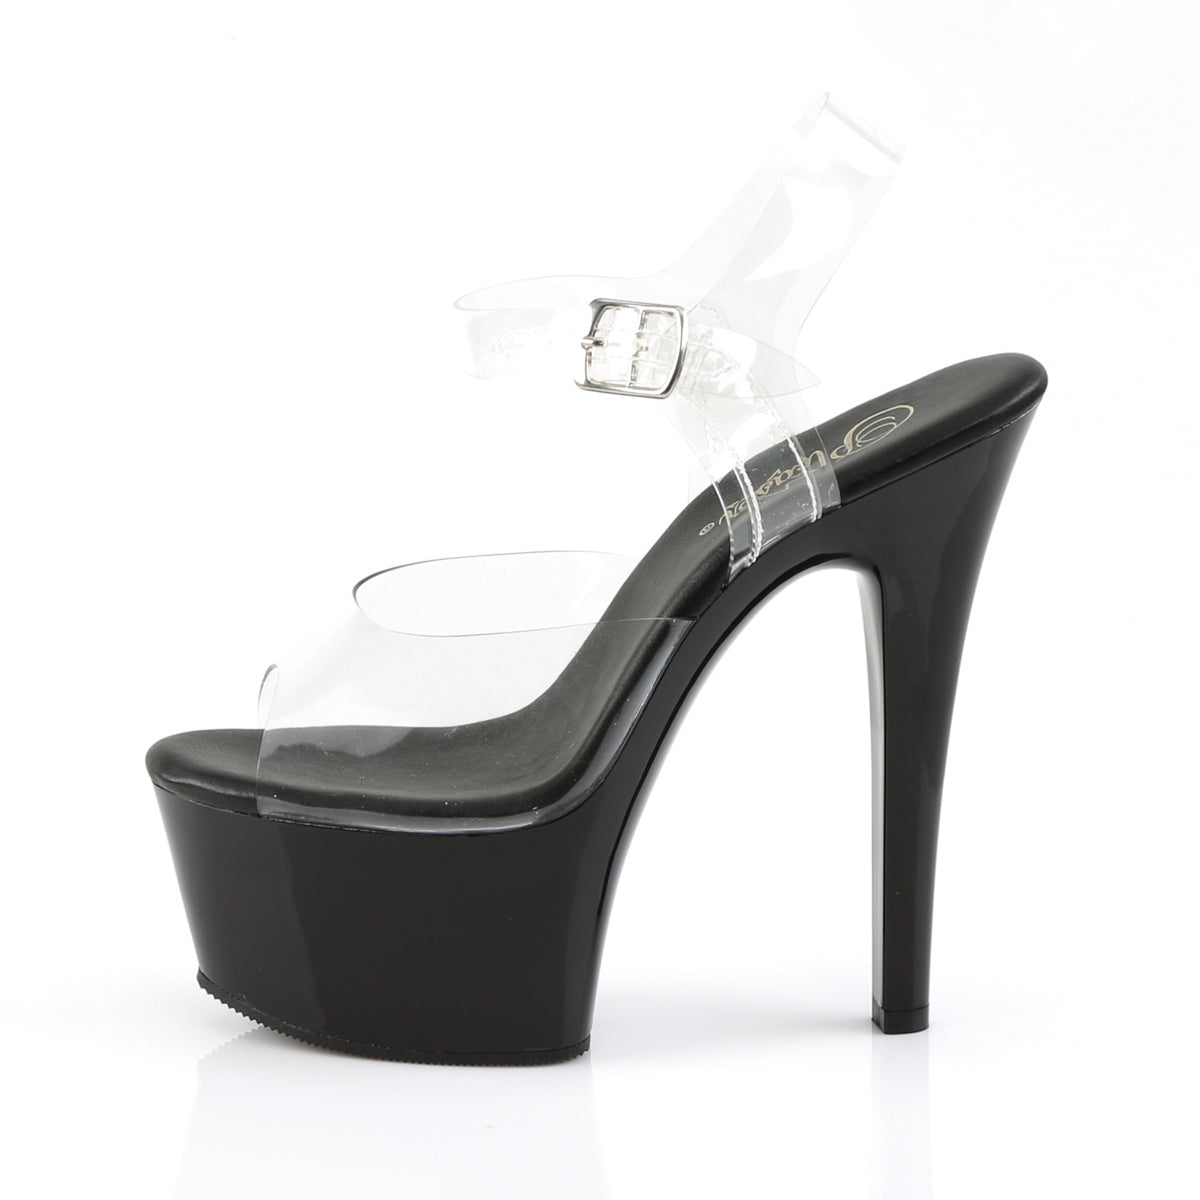 ASPIRE-608 Sexy 6" Heel Clear and Black Pole Dancing Shoes-Pleaser- Sexy Shoes Pole Dance Heels